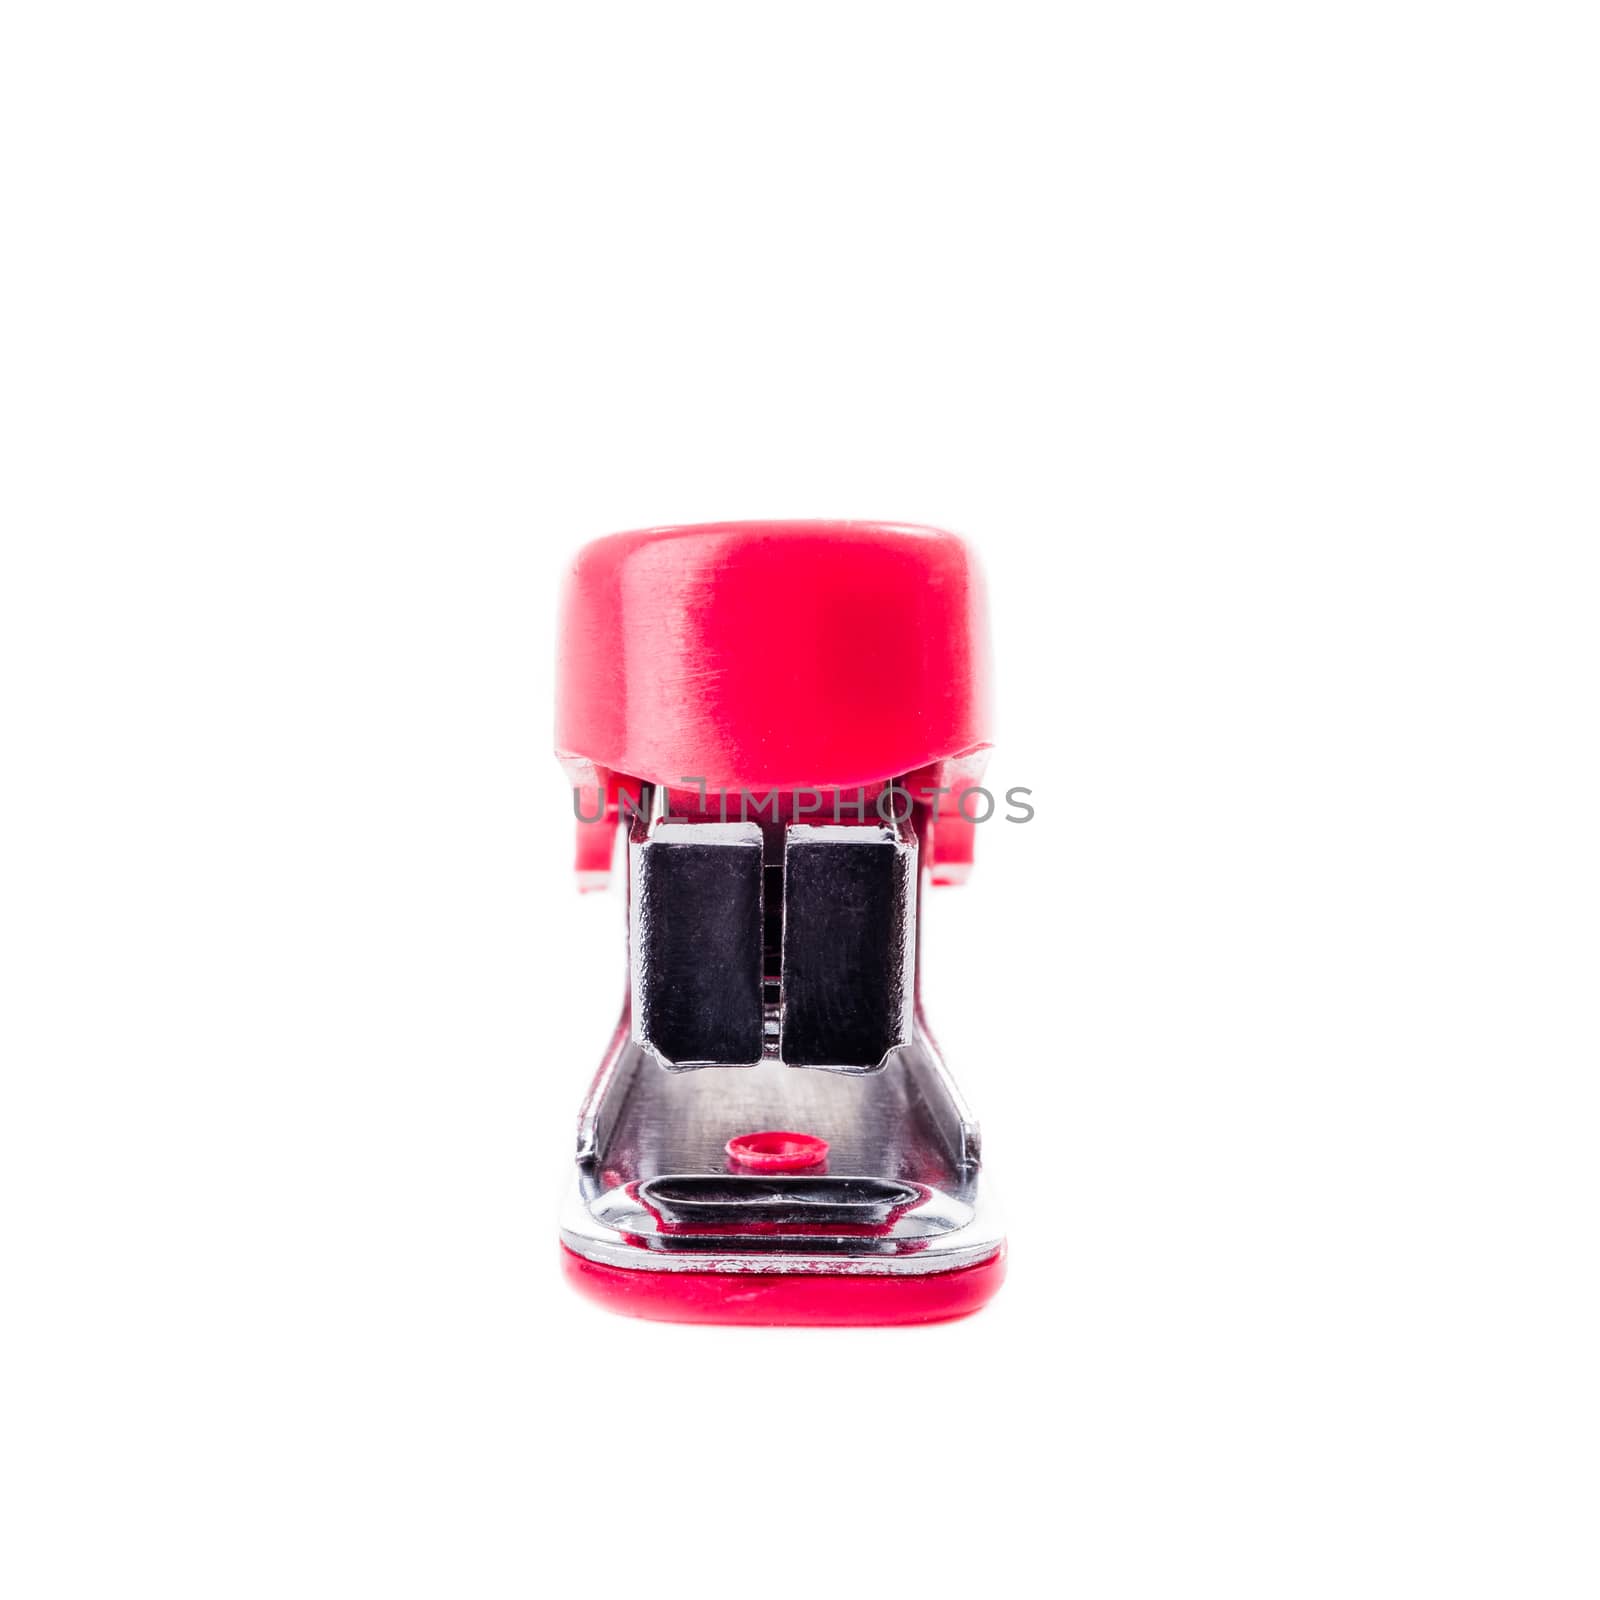 A miniture red stapler viewed from the front on a white background.